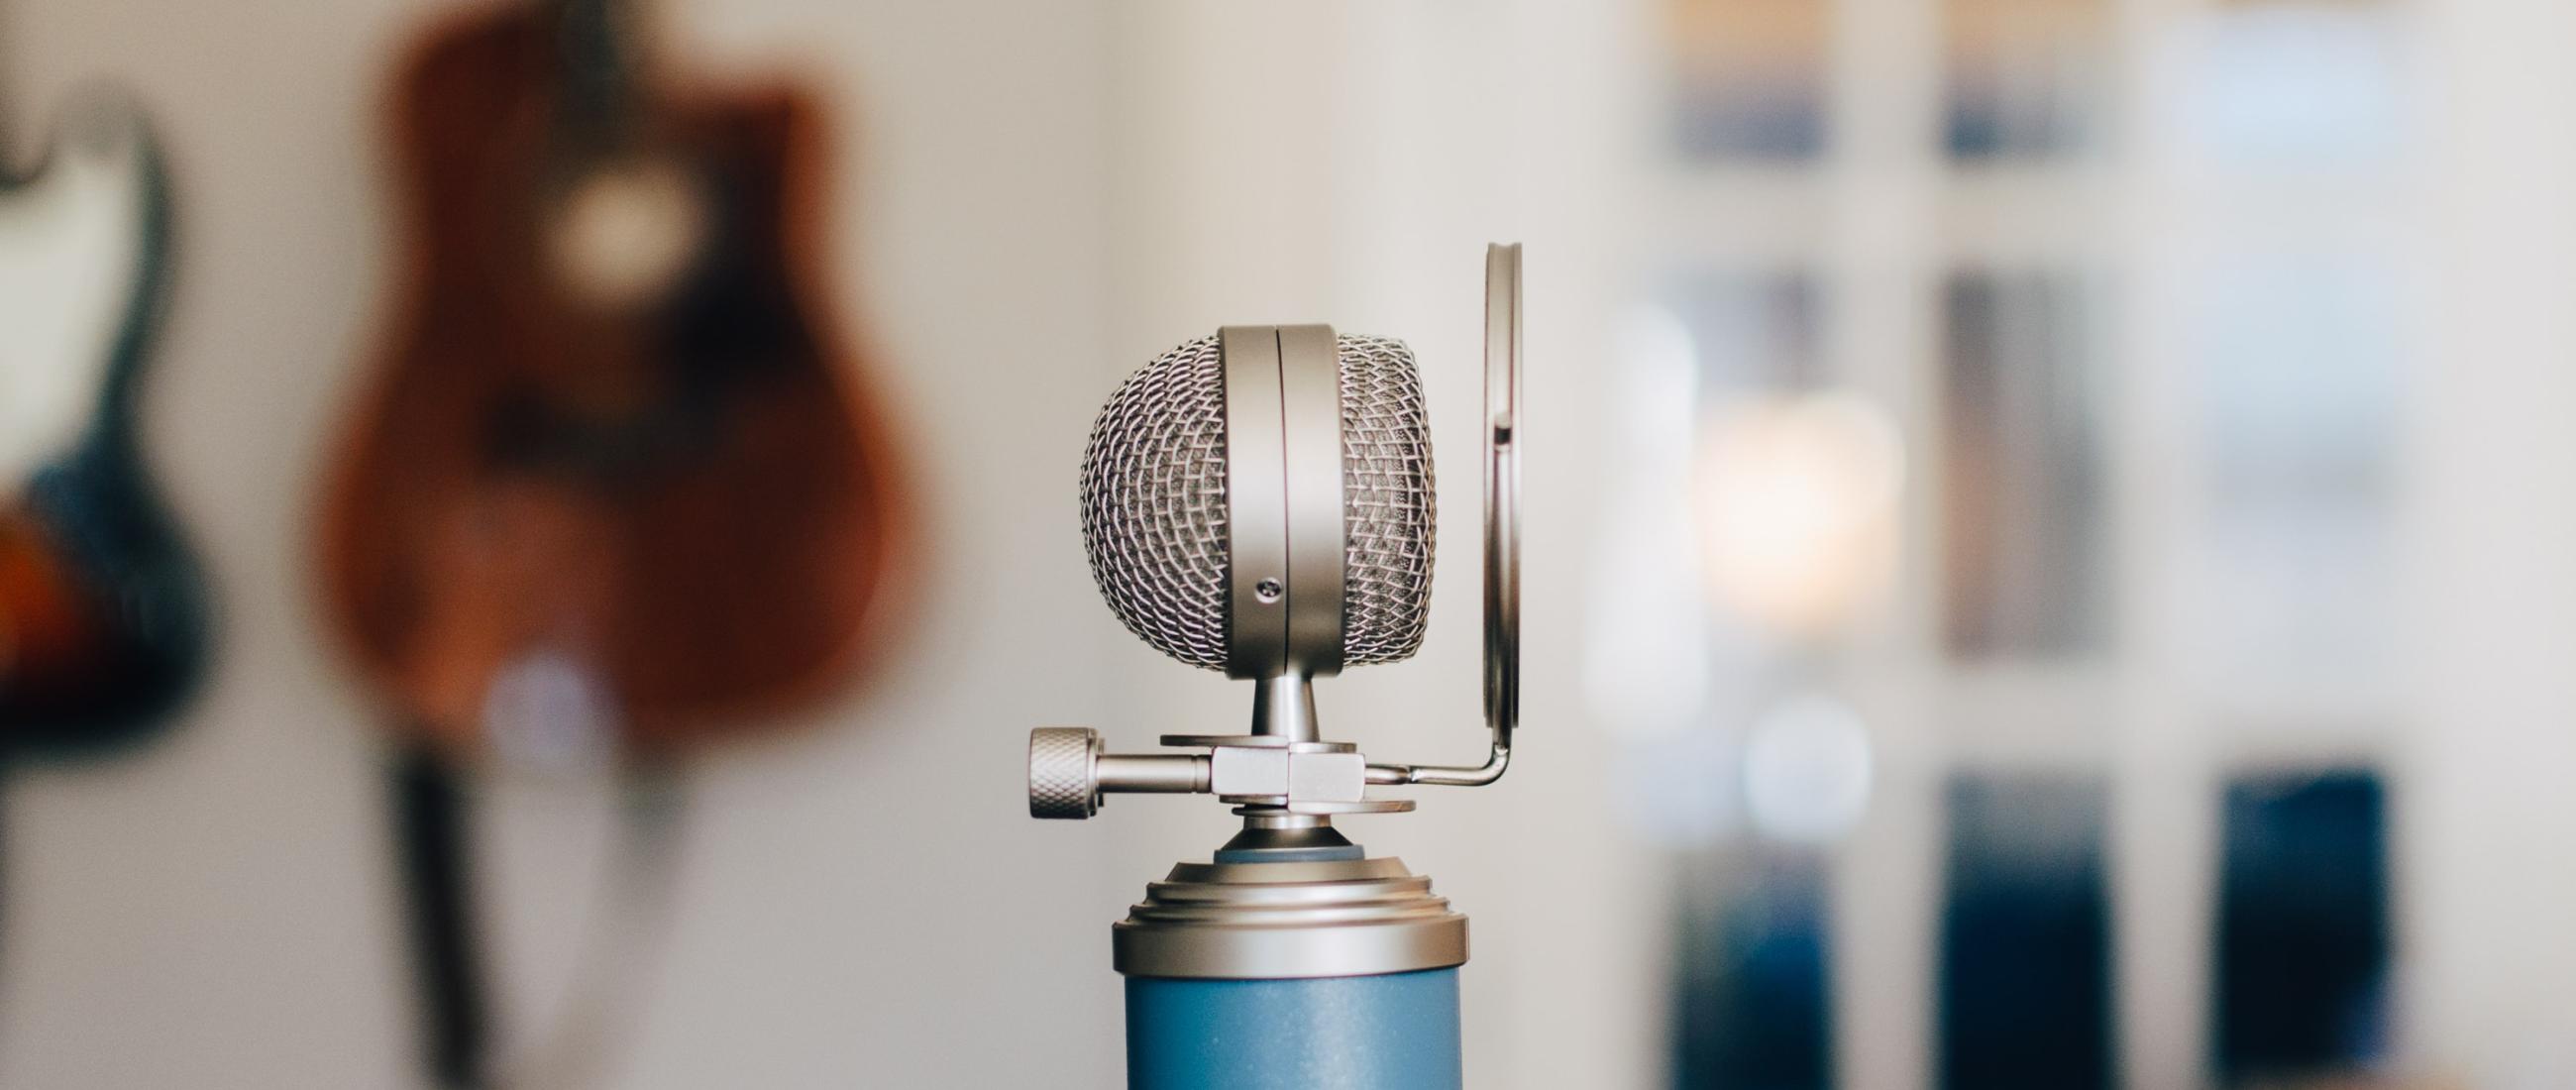 Microphone with unsharp utilities in the background